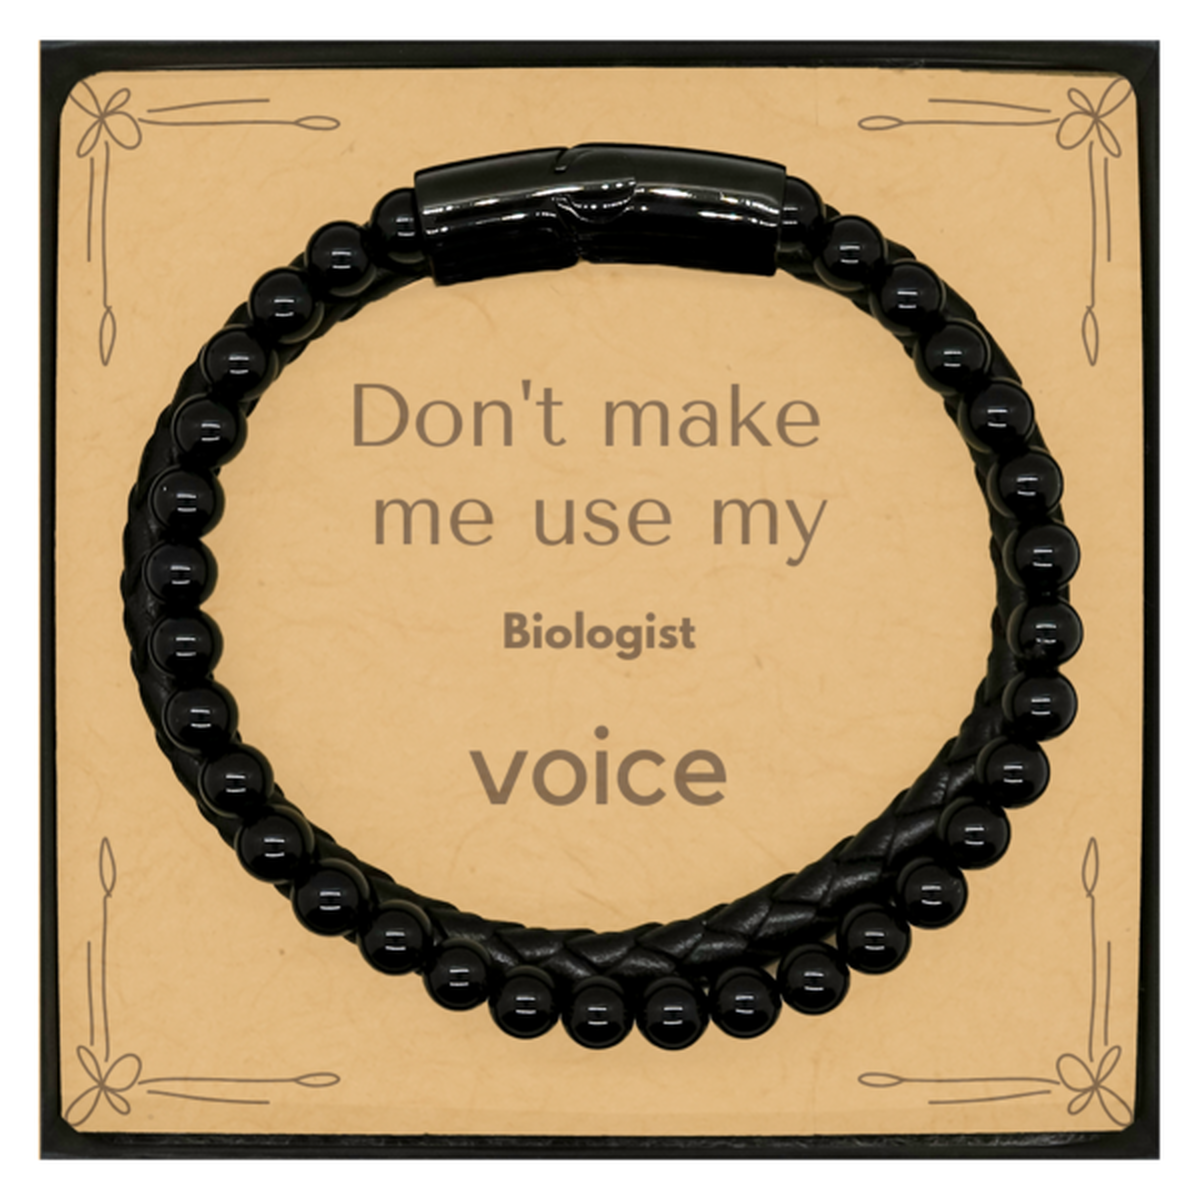 Don't make me use my Biologist voice, Sarcasm Biologist Card Gifts, Christmas Biologist Stone Leather Bracelets Birthday Unique Gifts For Biologist Coworkers, Men, Women, Colleague, Friends